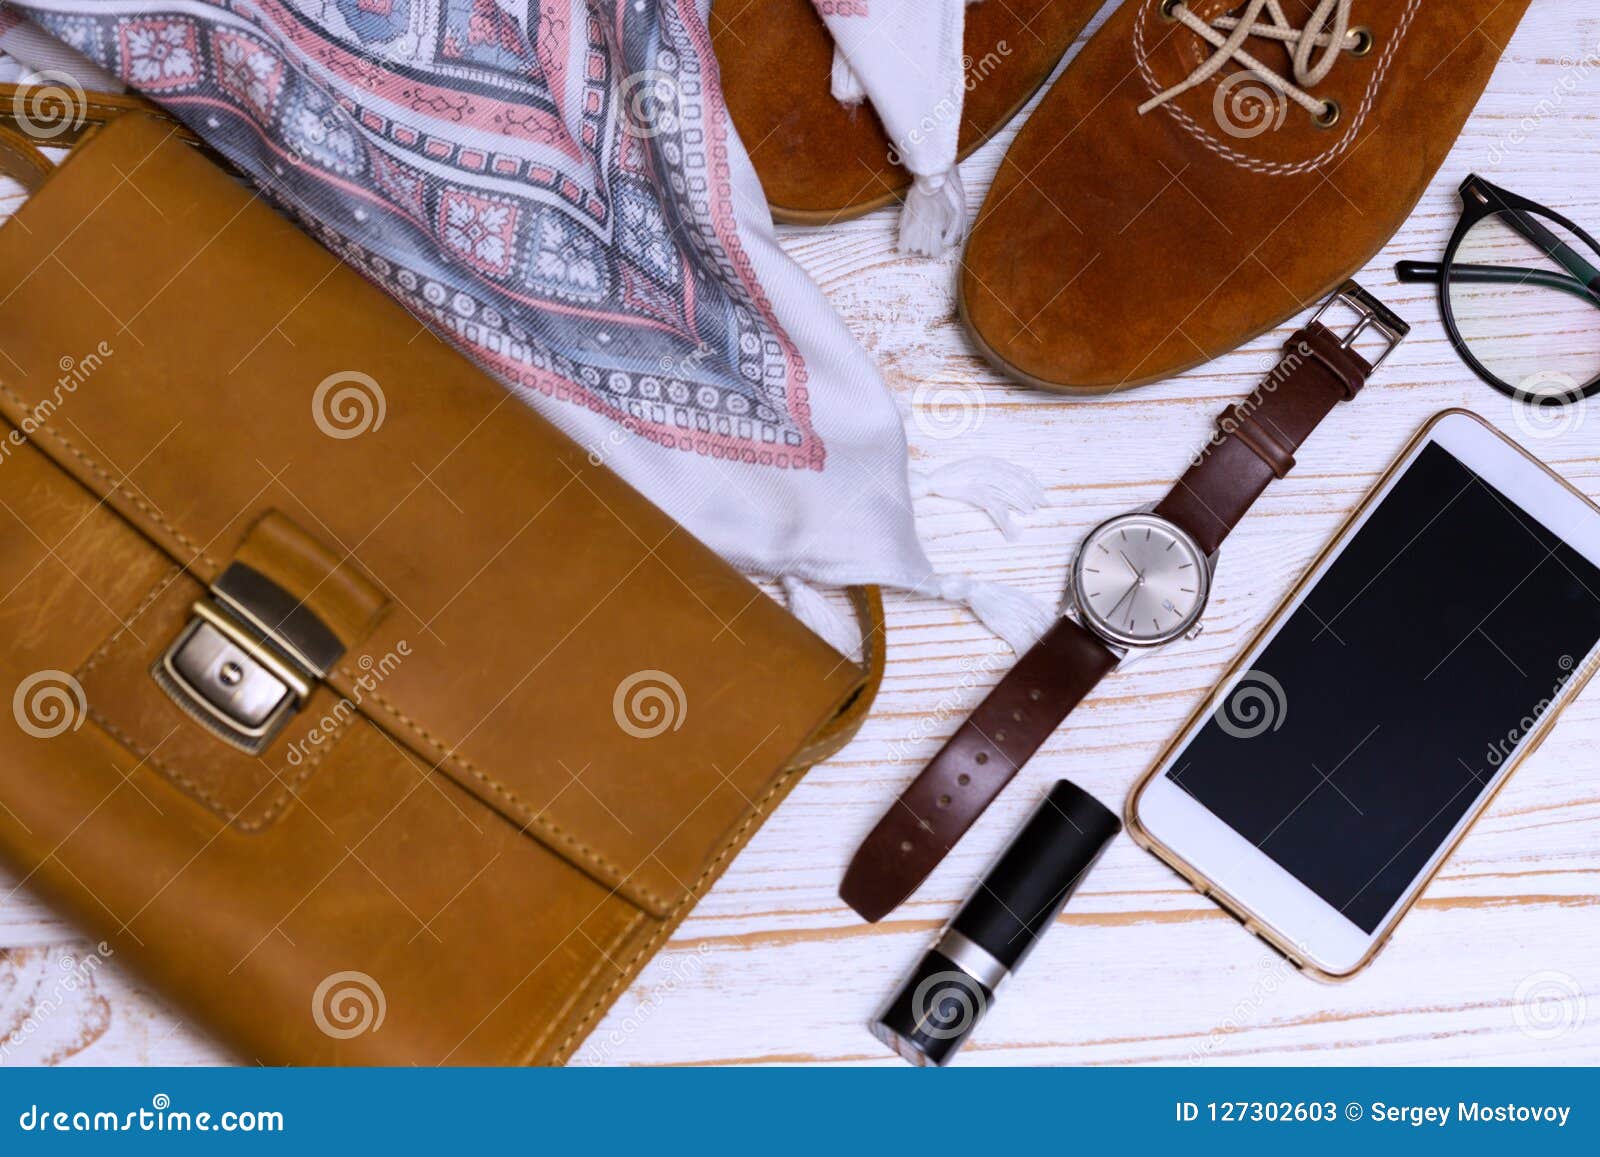 The Contents of the Female Handbag Stock Image - Image of contents ...